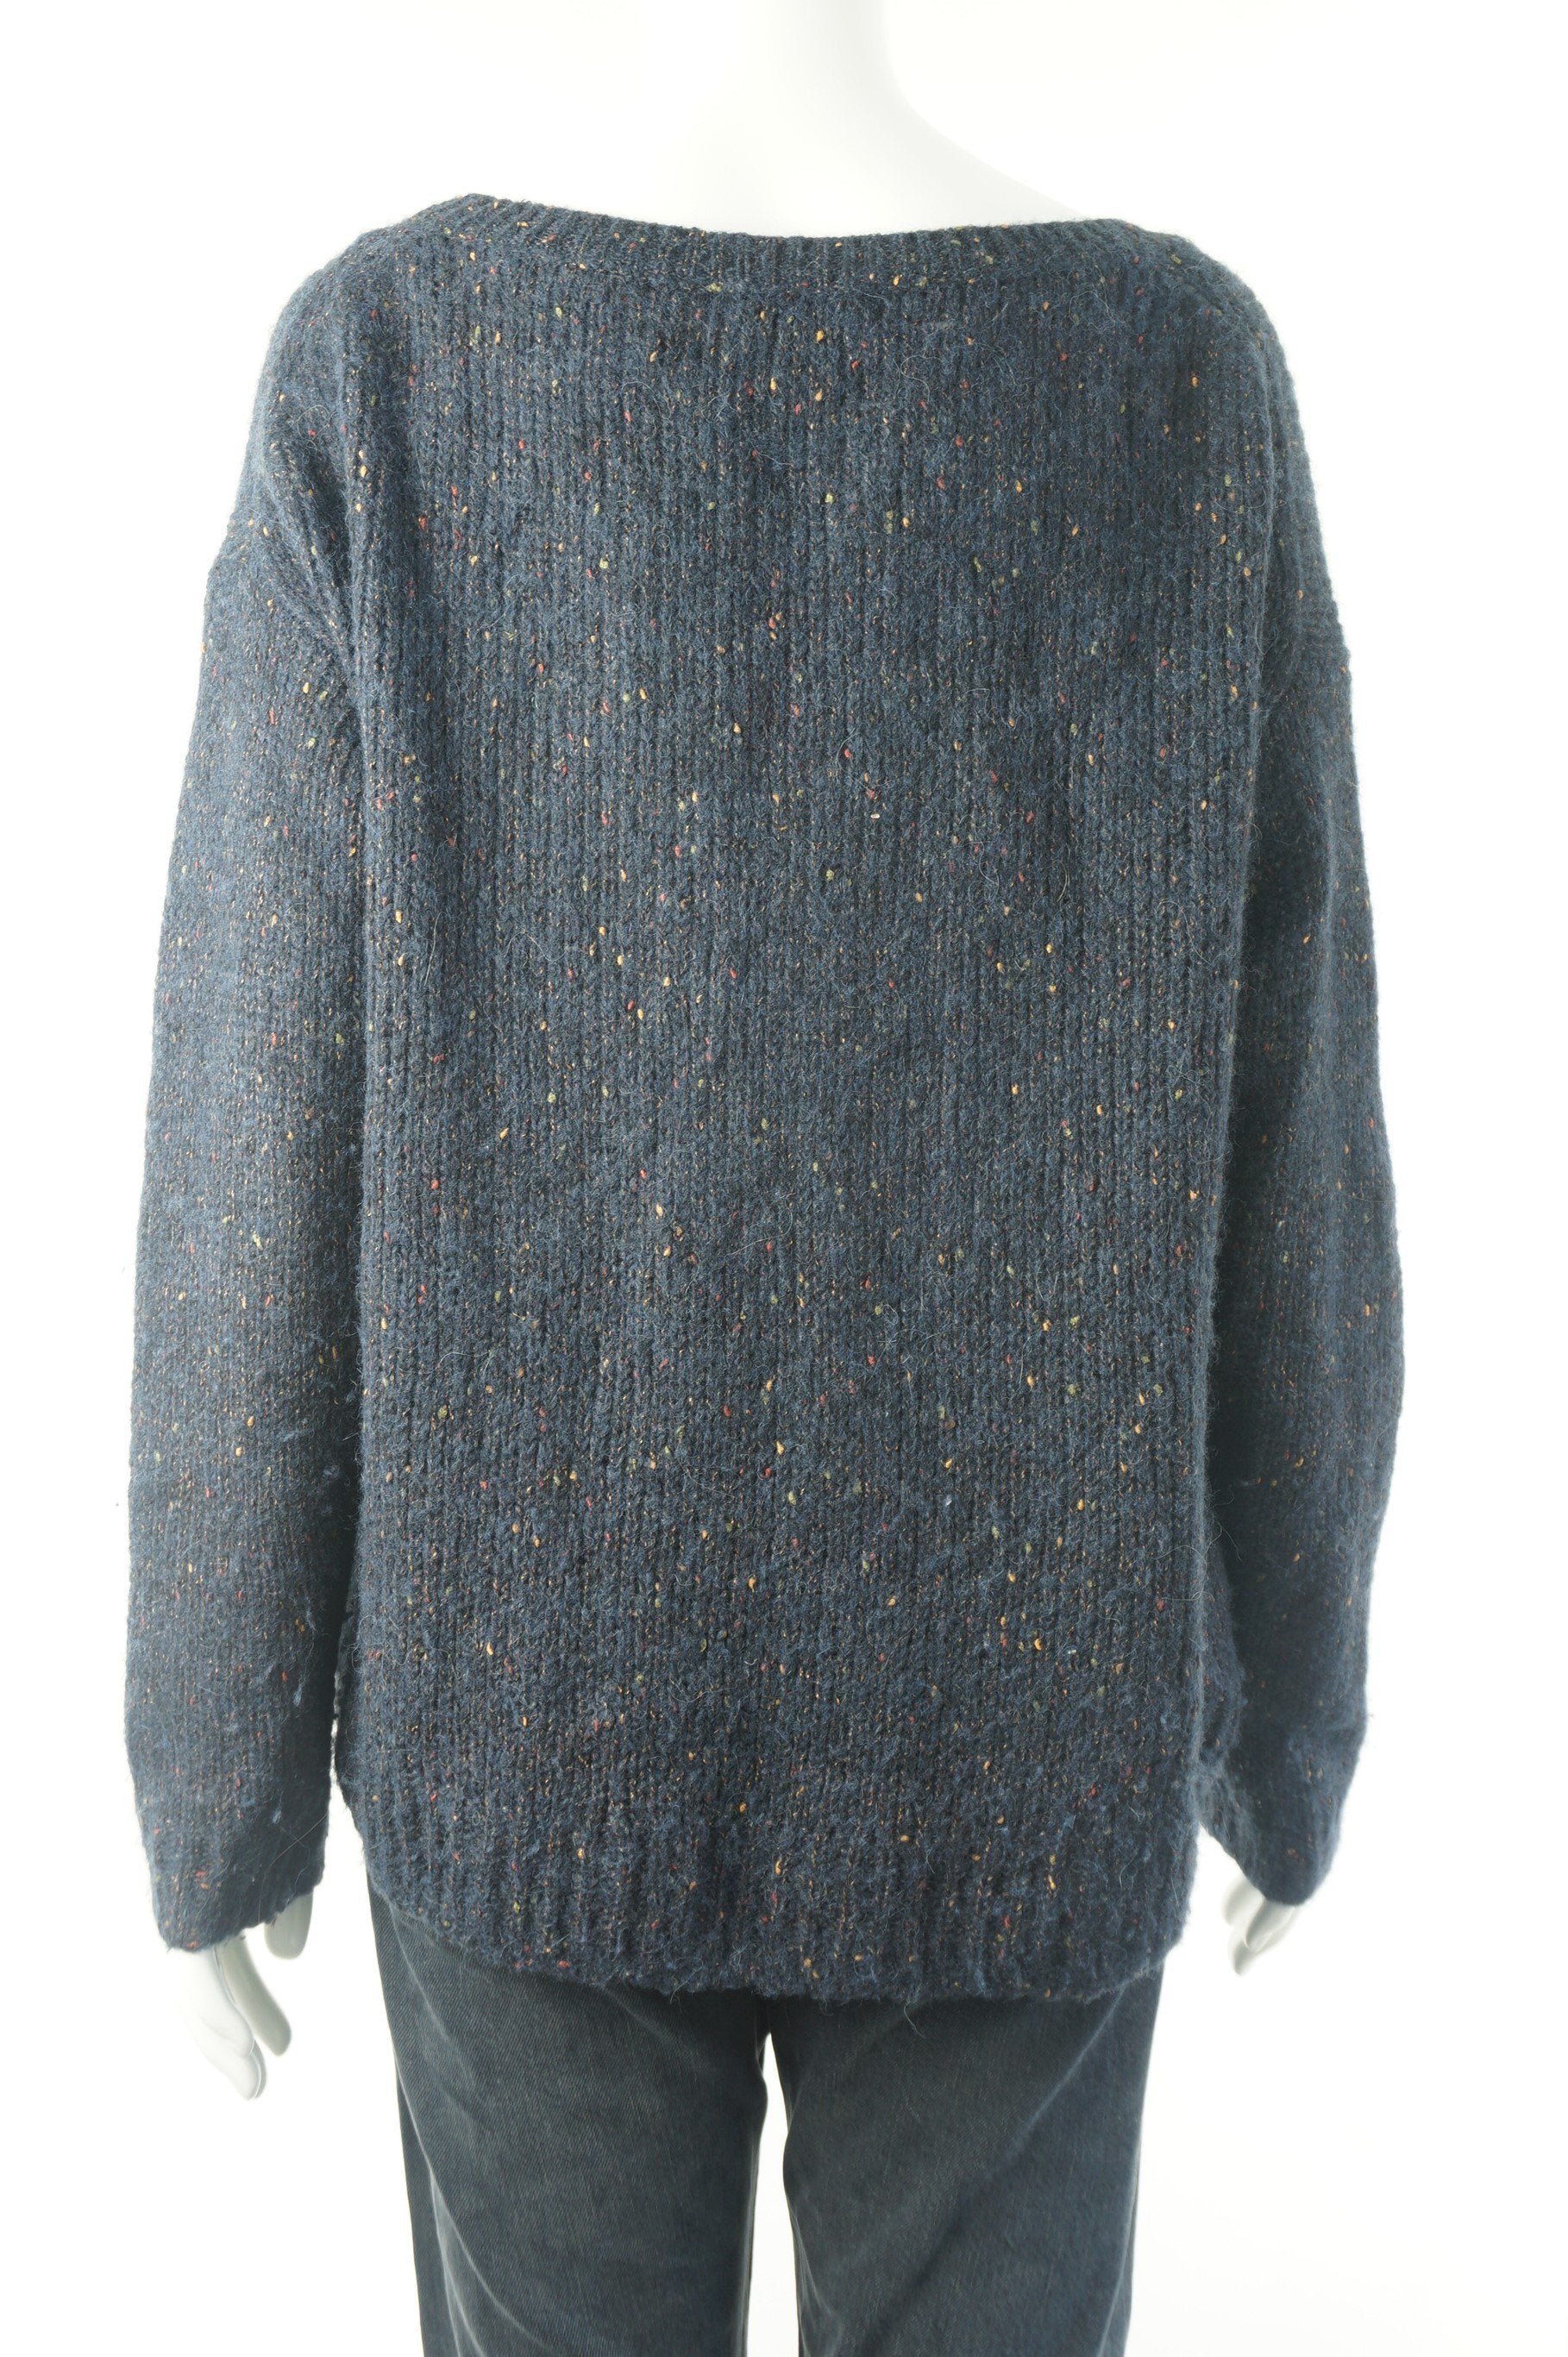 Babaton Oversized Sweater With Alpaca Wool, Relaxed and slouchy sweater made from alpaca blend. You next lazy Sunday outfit? Fits larger., Blue, 40% Alpaca, 32% Viscose, 20% Polymide, 8% wool, women's Tops, women's Blue Tops, Babaton women's Tops, aritzia babaton oversized sweater, aritzia women's sweater, aritzia wide-neck loose-fitting sweater,